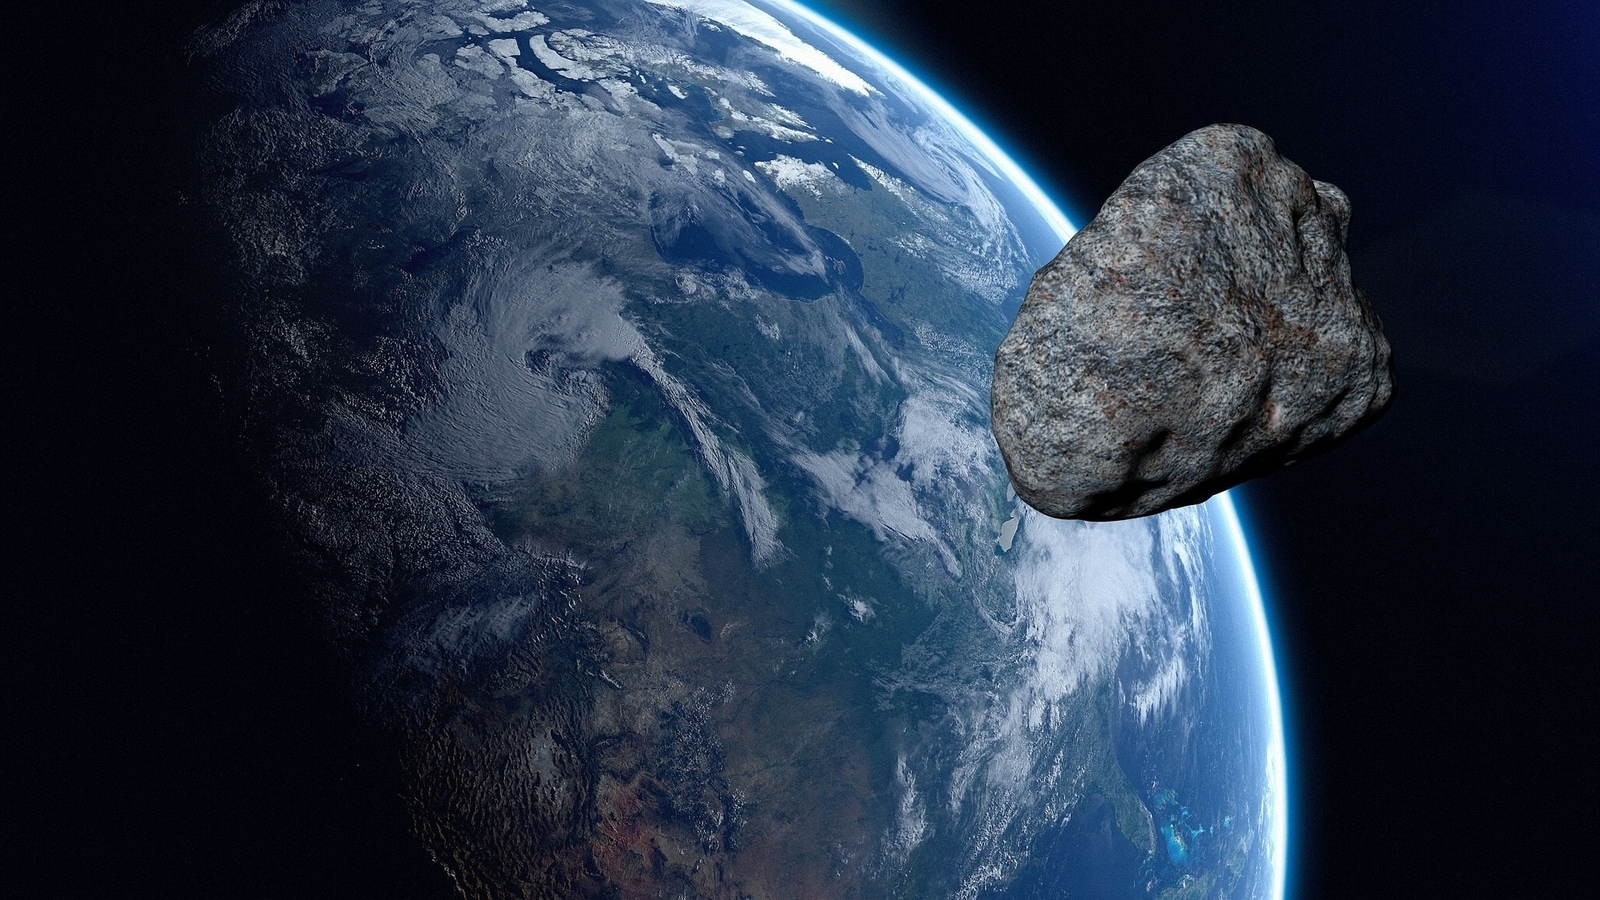 Can near-Earth object be DANGEROUS? Here is how NASA wants to stop scary comets, asteroids